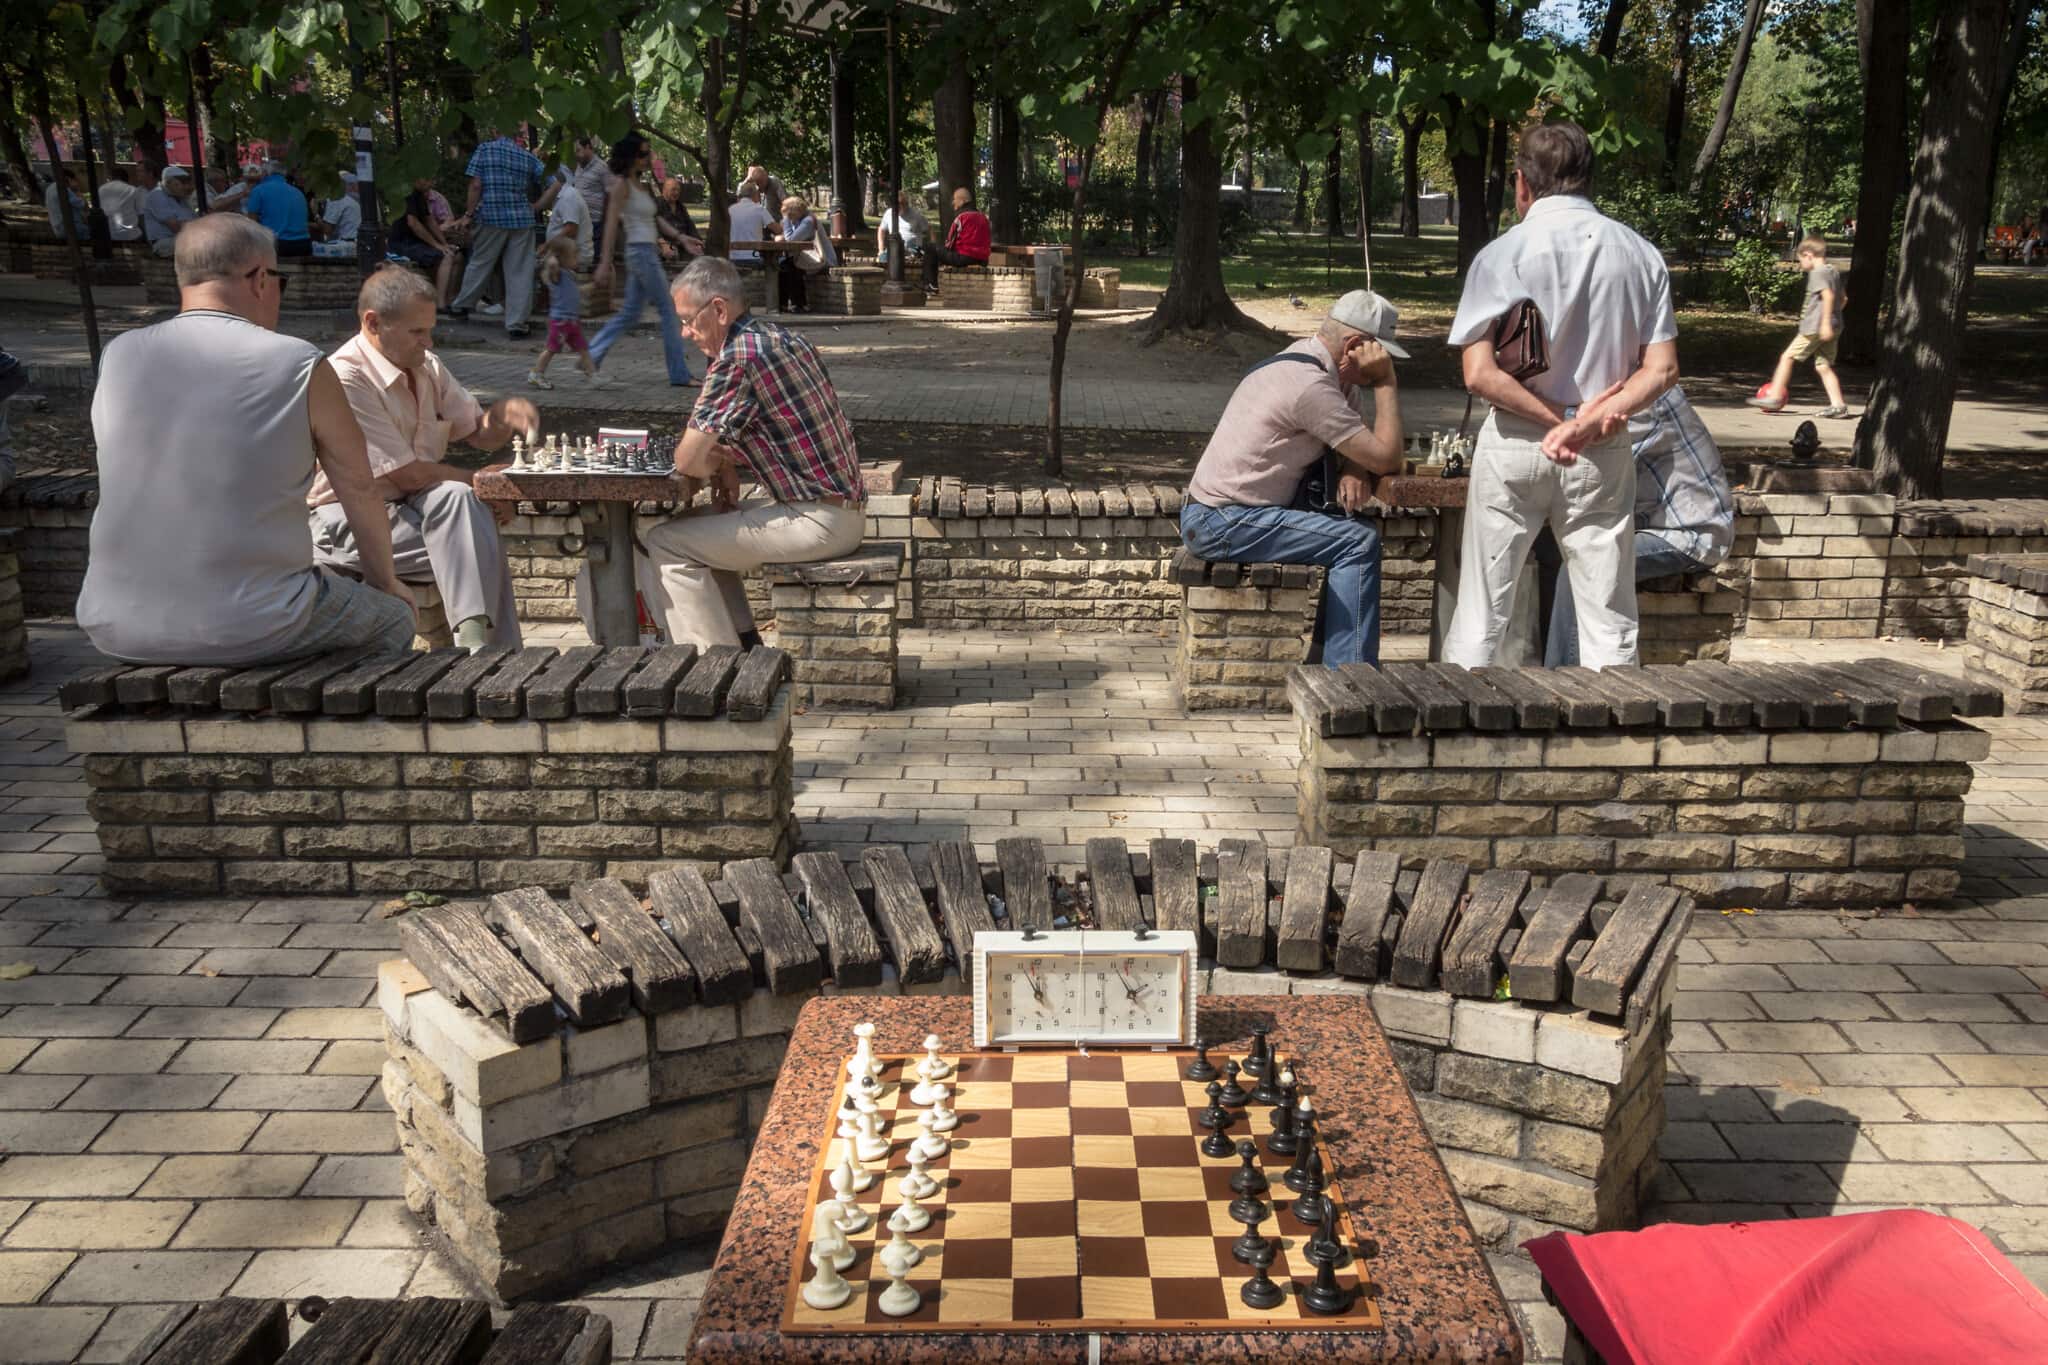 The Queen's Gambit' Ending - Chess Game In Russian Park, Explained